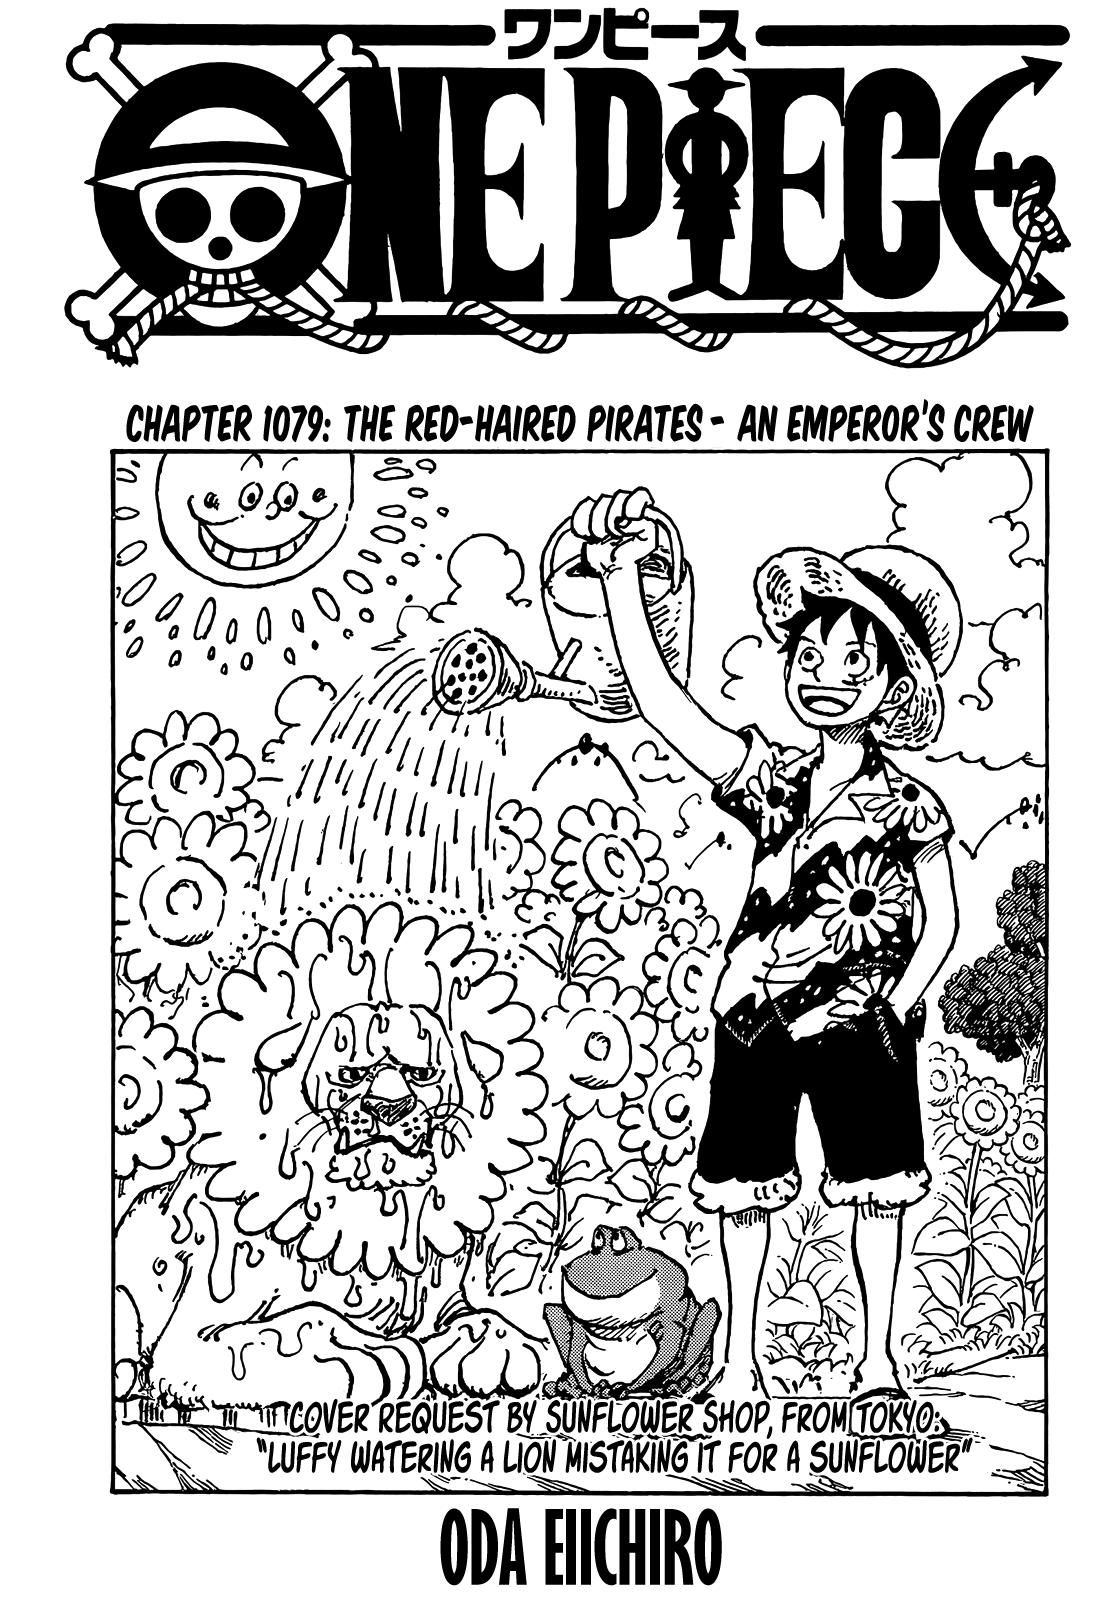 Read One Piece Chapter 1079: The Red-Haired Pirates - An Emperor'S Crew On  Mangakakalot